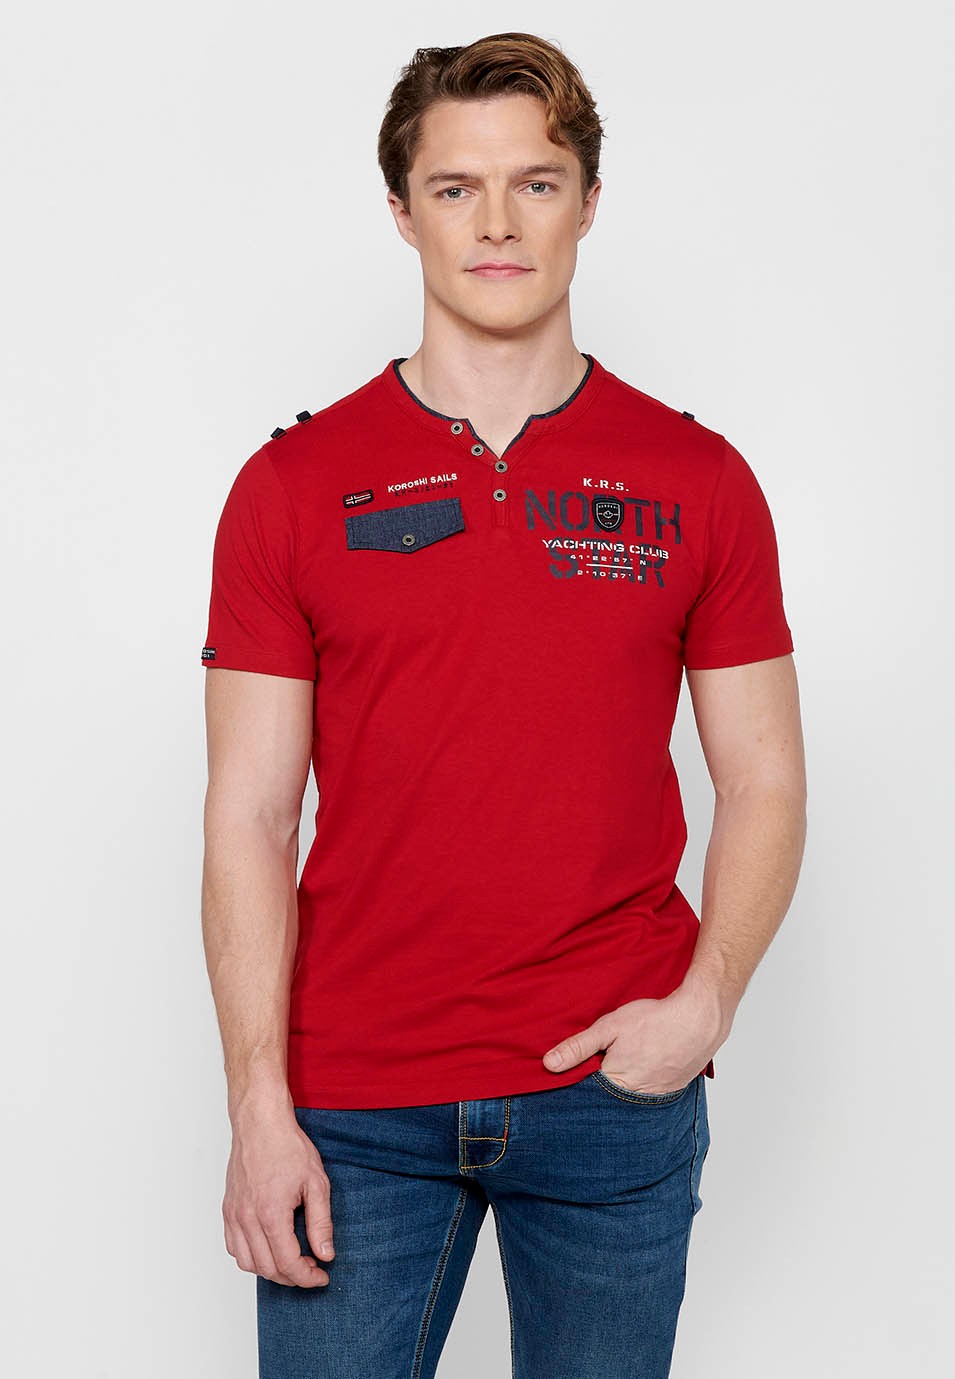 Short Sleeve Cotton T-shirt with Round Neck with Buttoned Opening in Red for Men